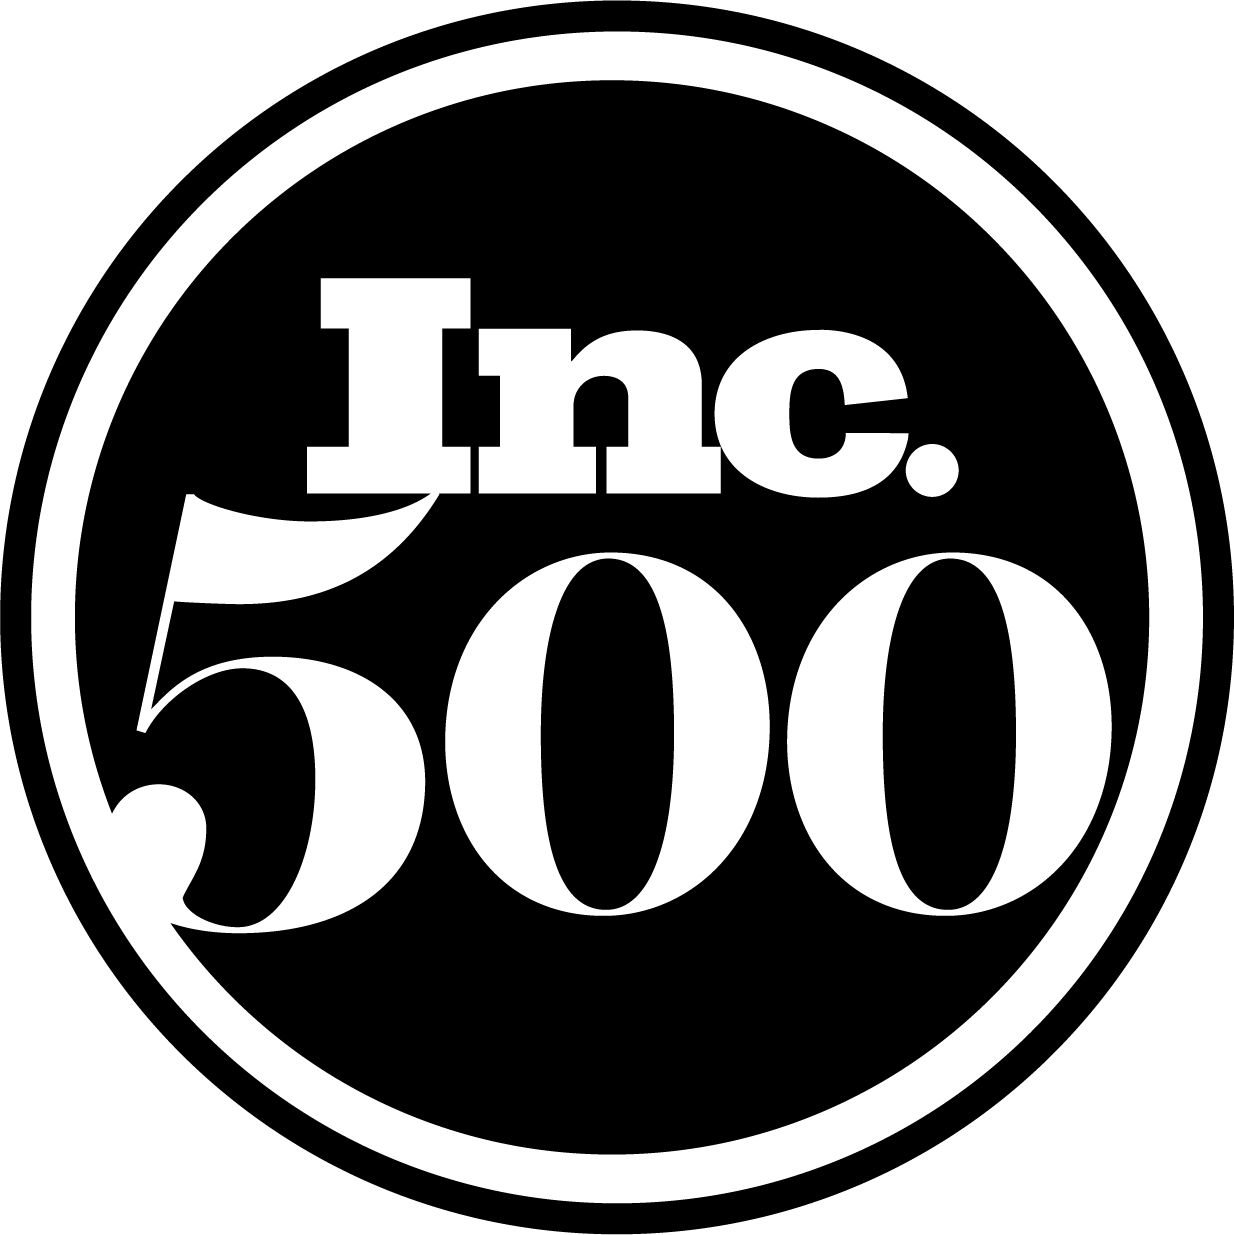 KnowBe4 Lands on the Inc. 500 for the Fourth Time